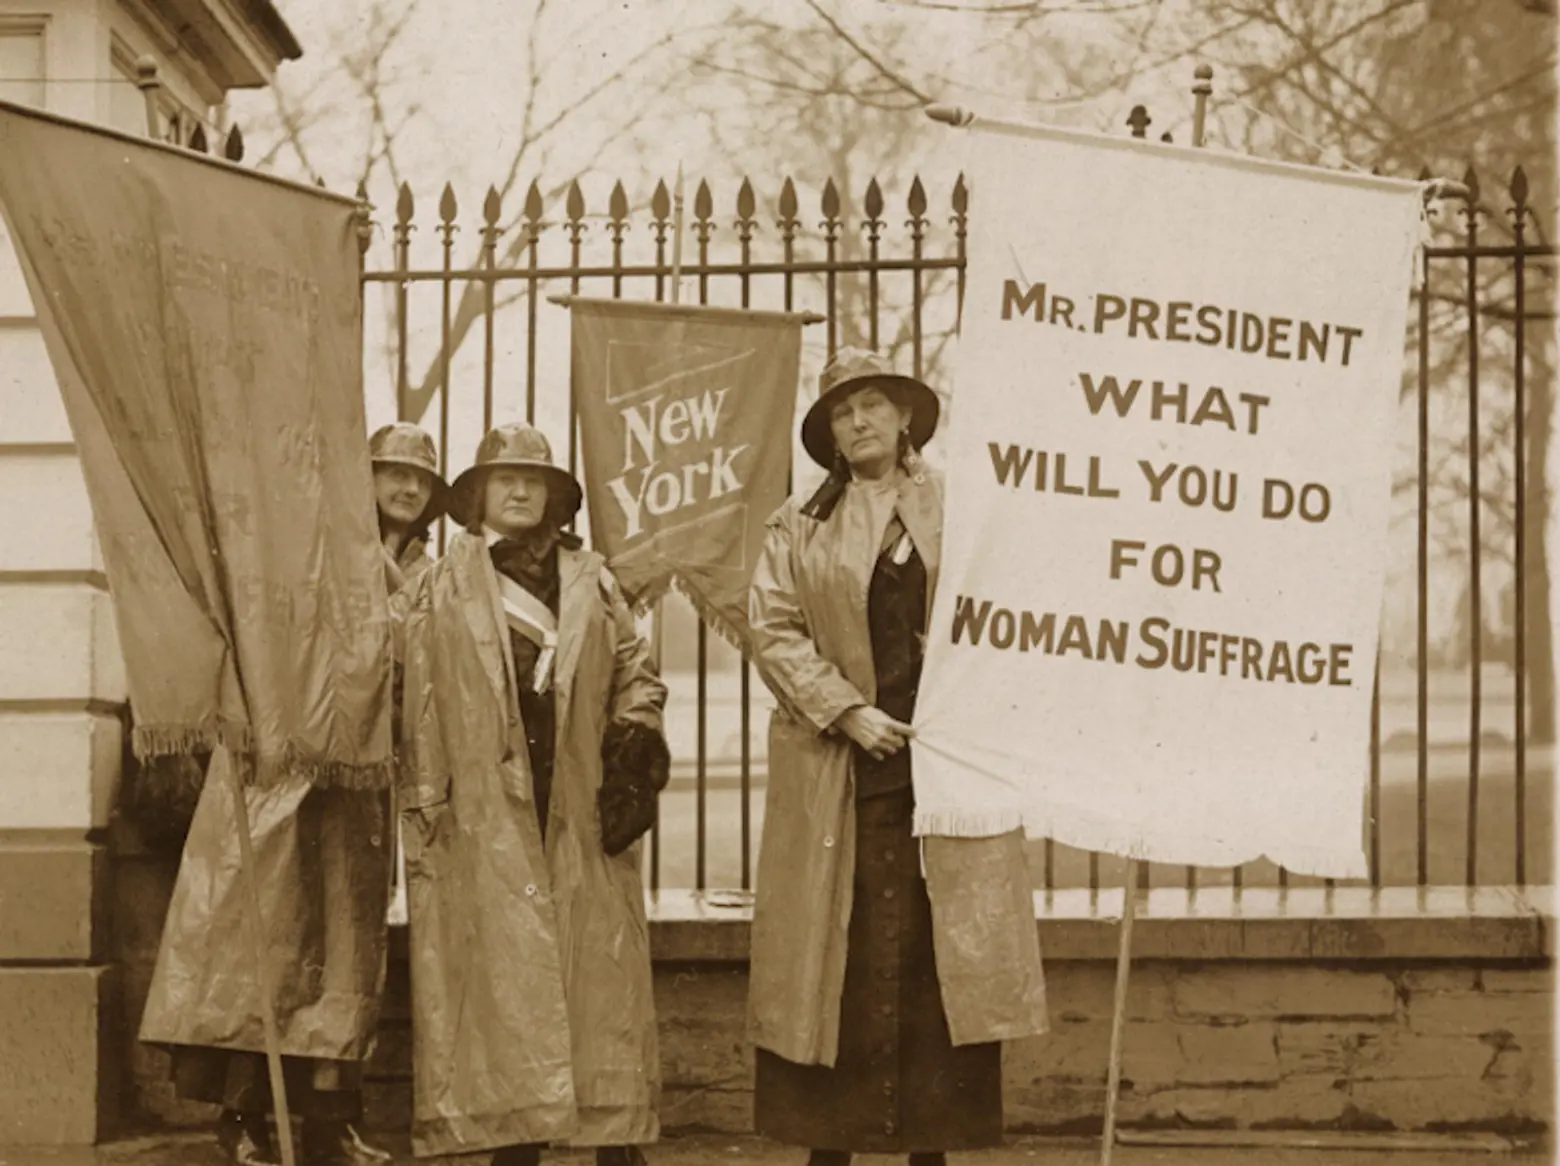 Women's History Month began in New York in 1909 to honor the